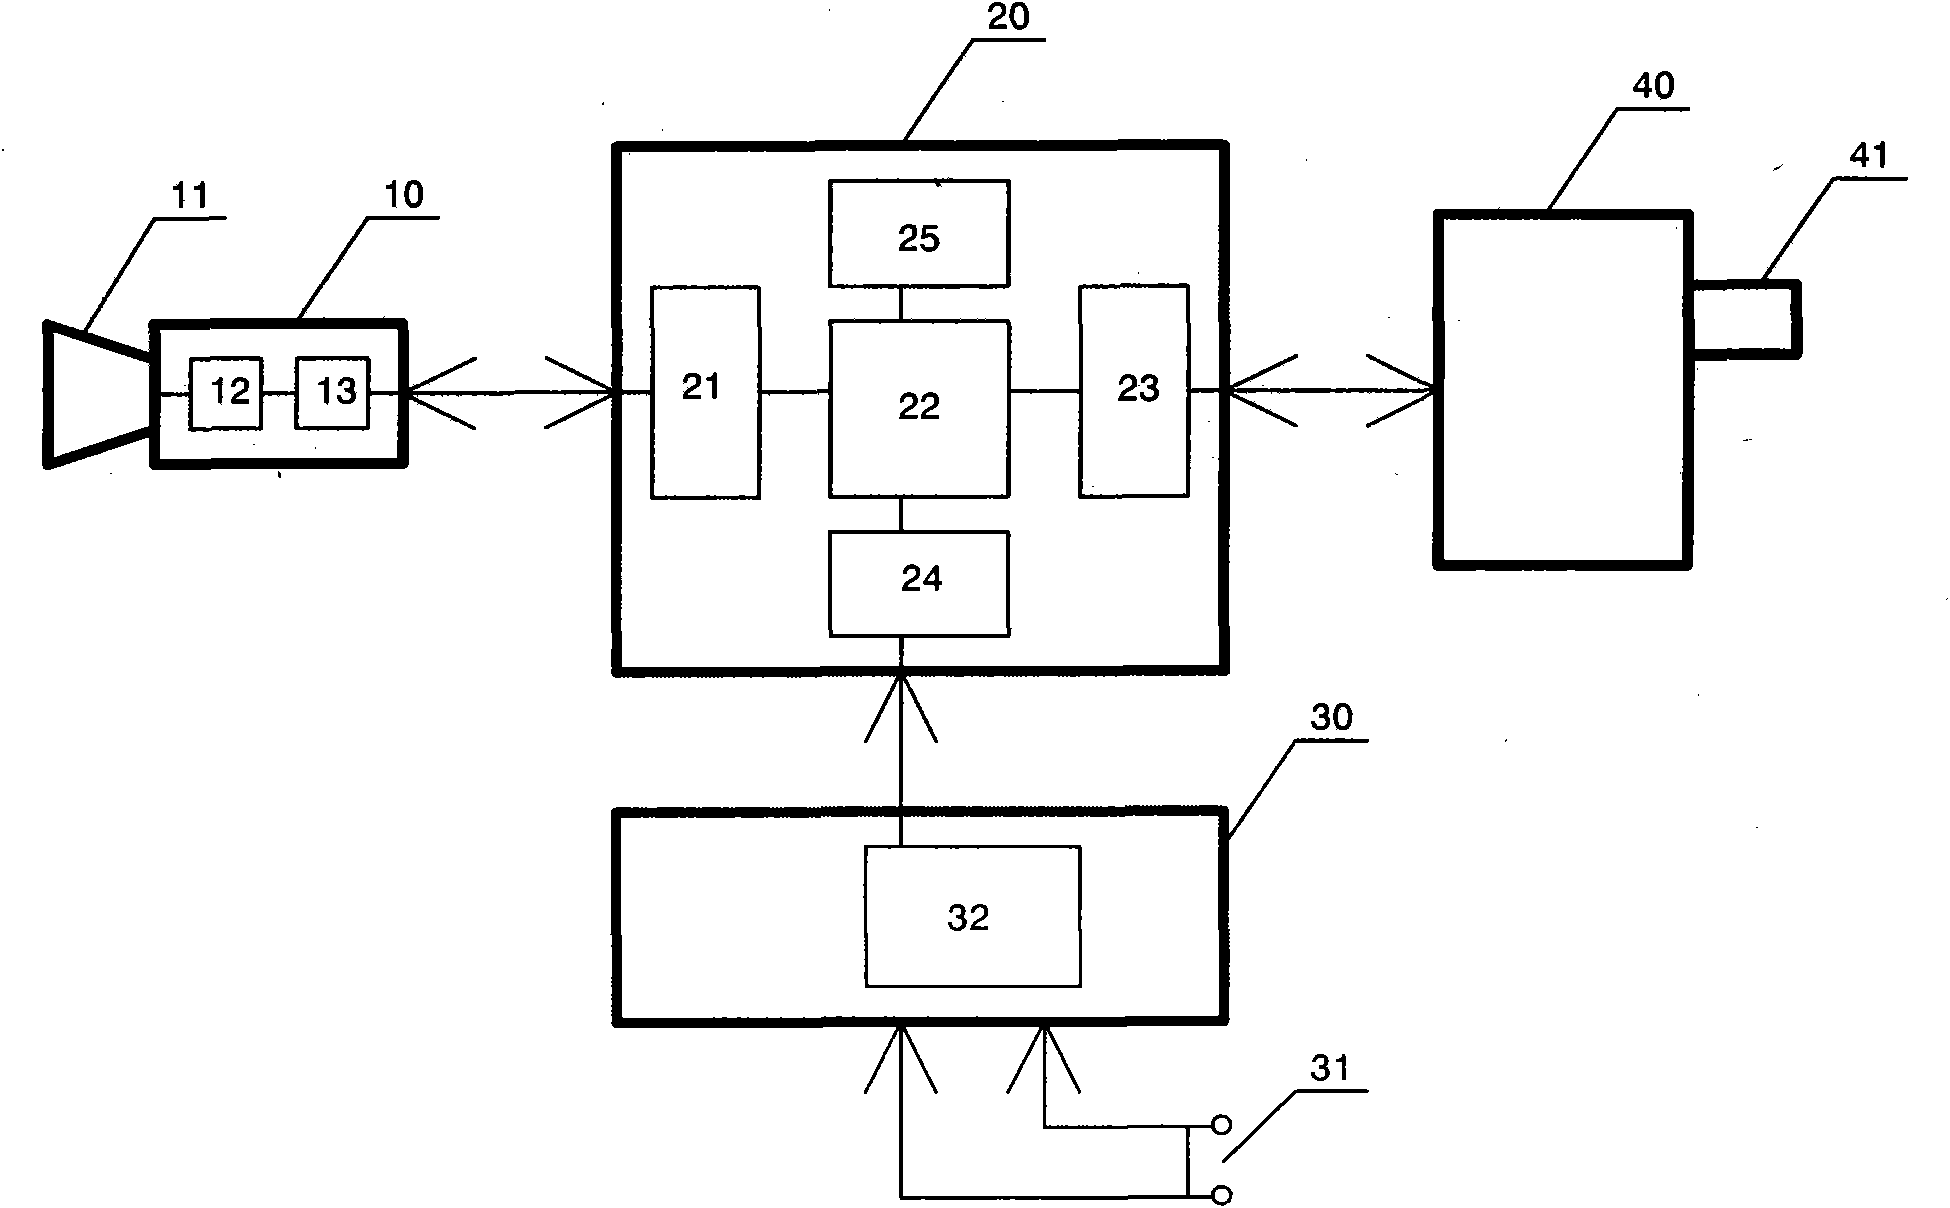 Human identification-based household anti-theft method and device